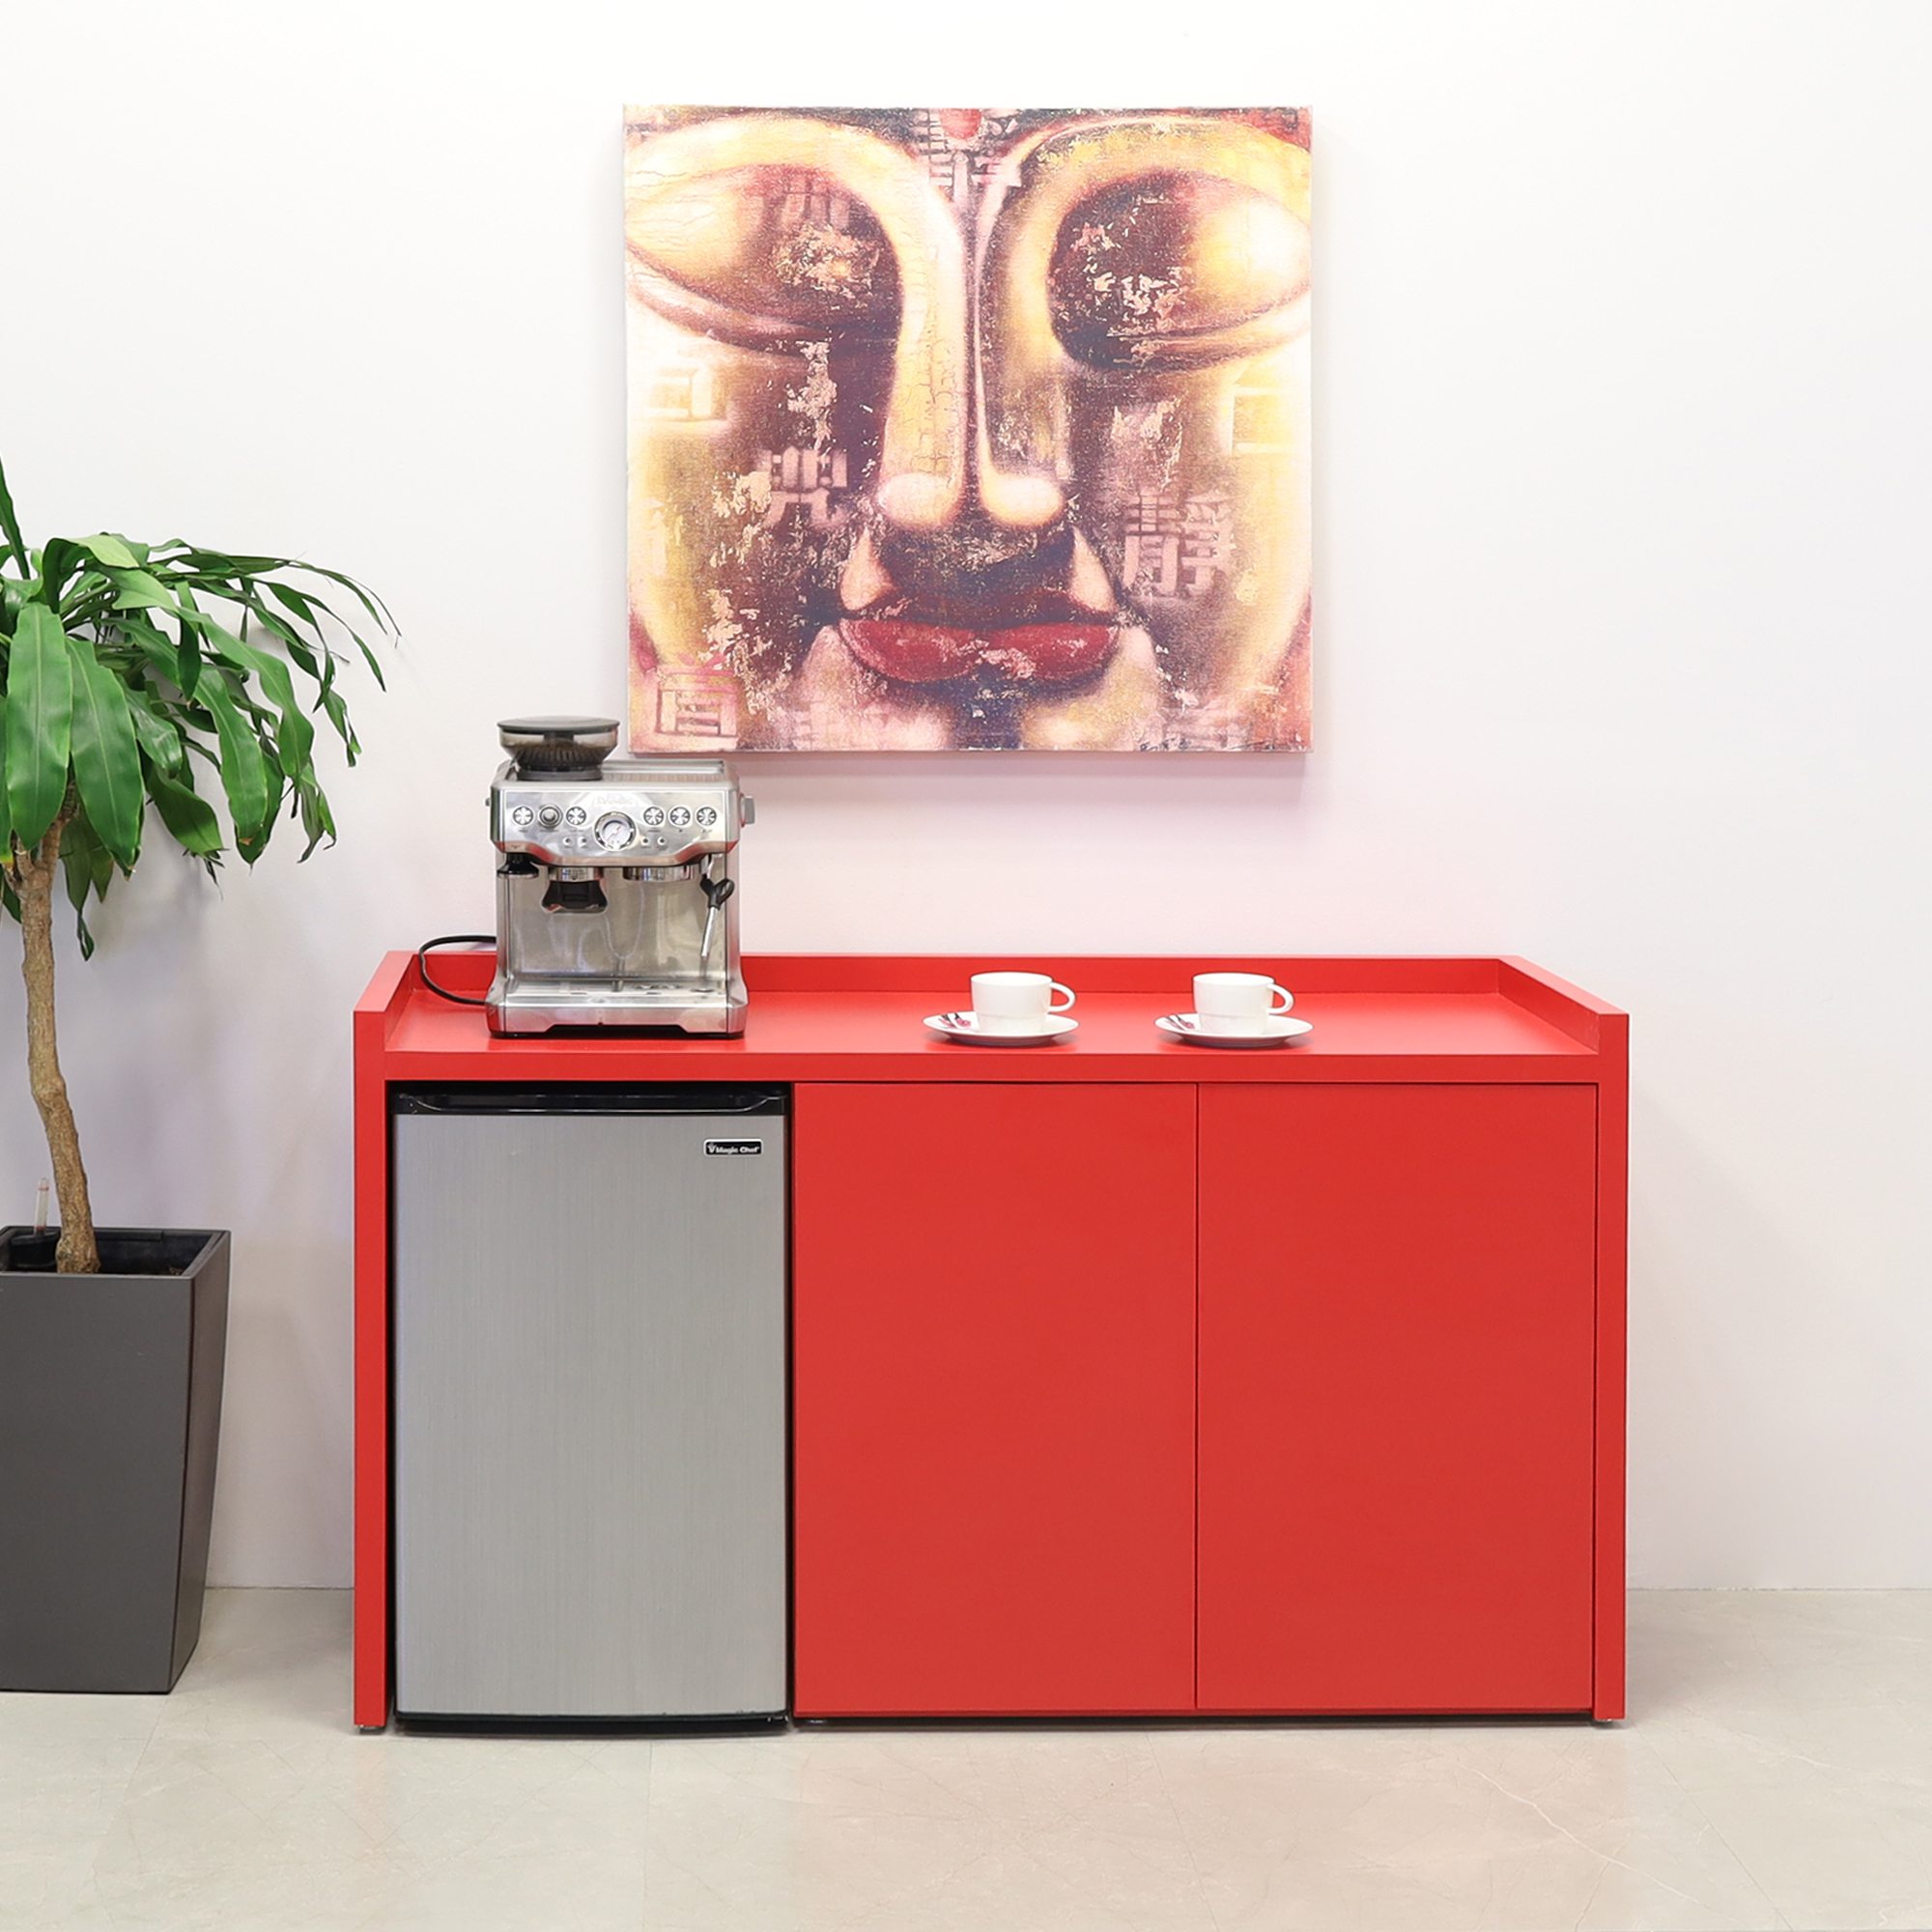 Avenue Beverage Server Station in classic red matte laminate top, station and doors shown here.